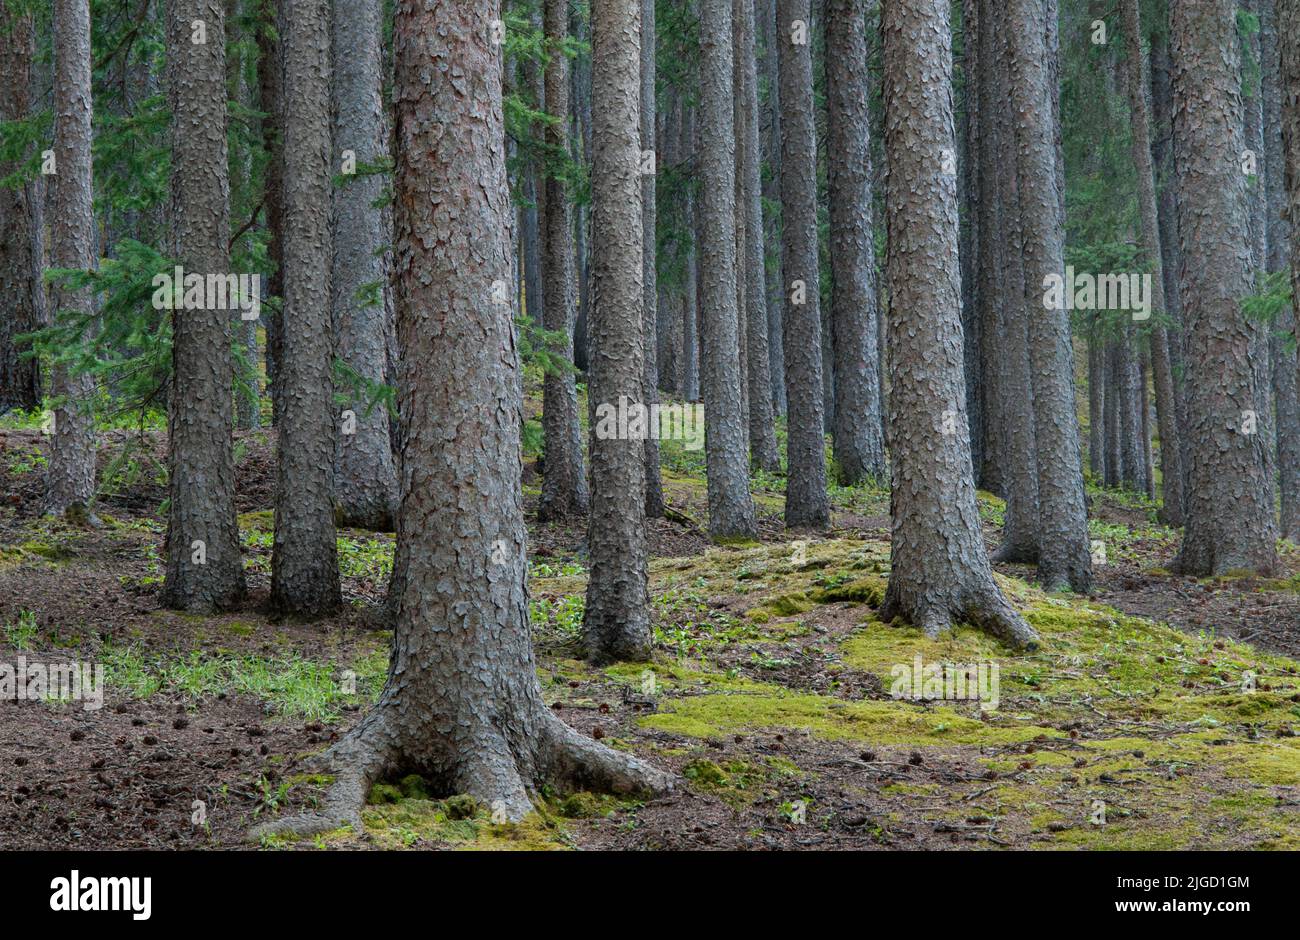 Conifer forest in Colorado, USA Stock Photo